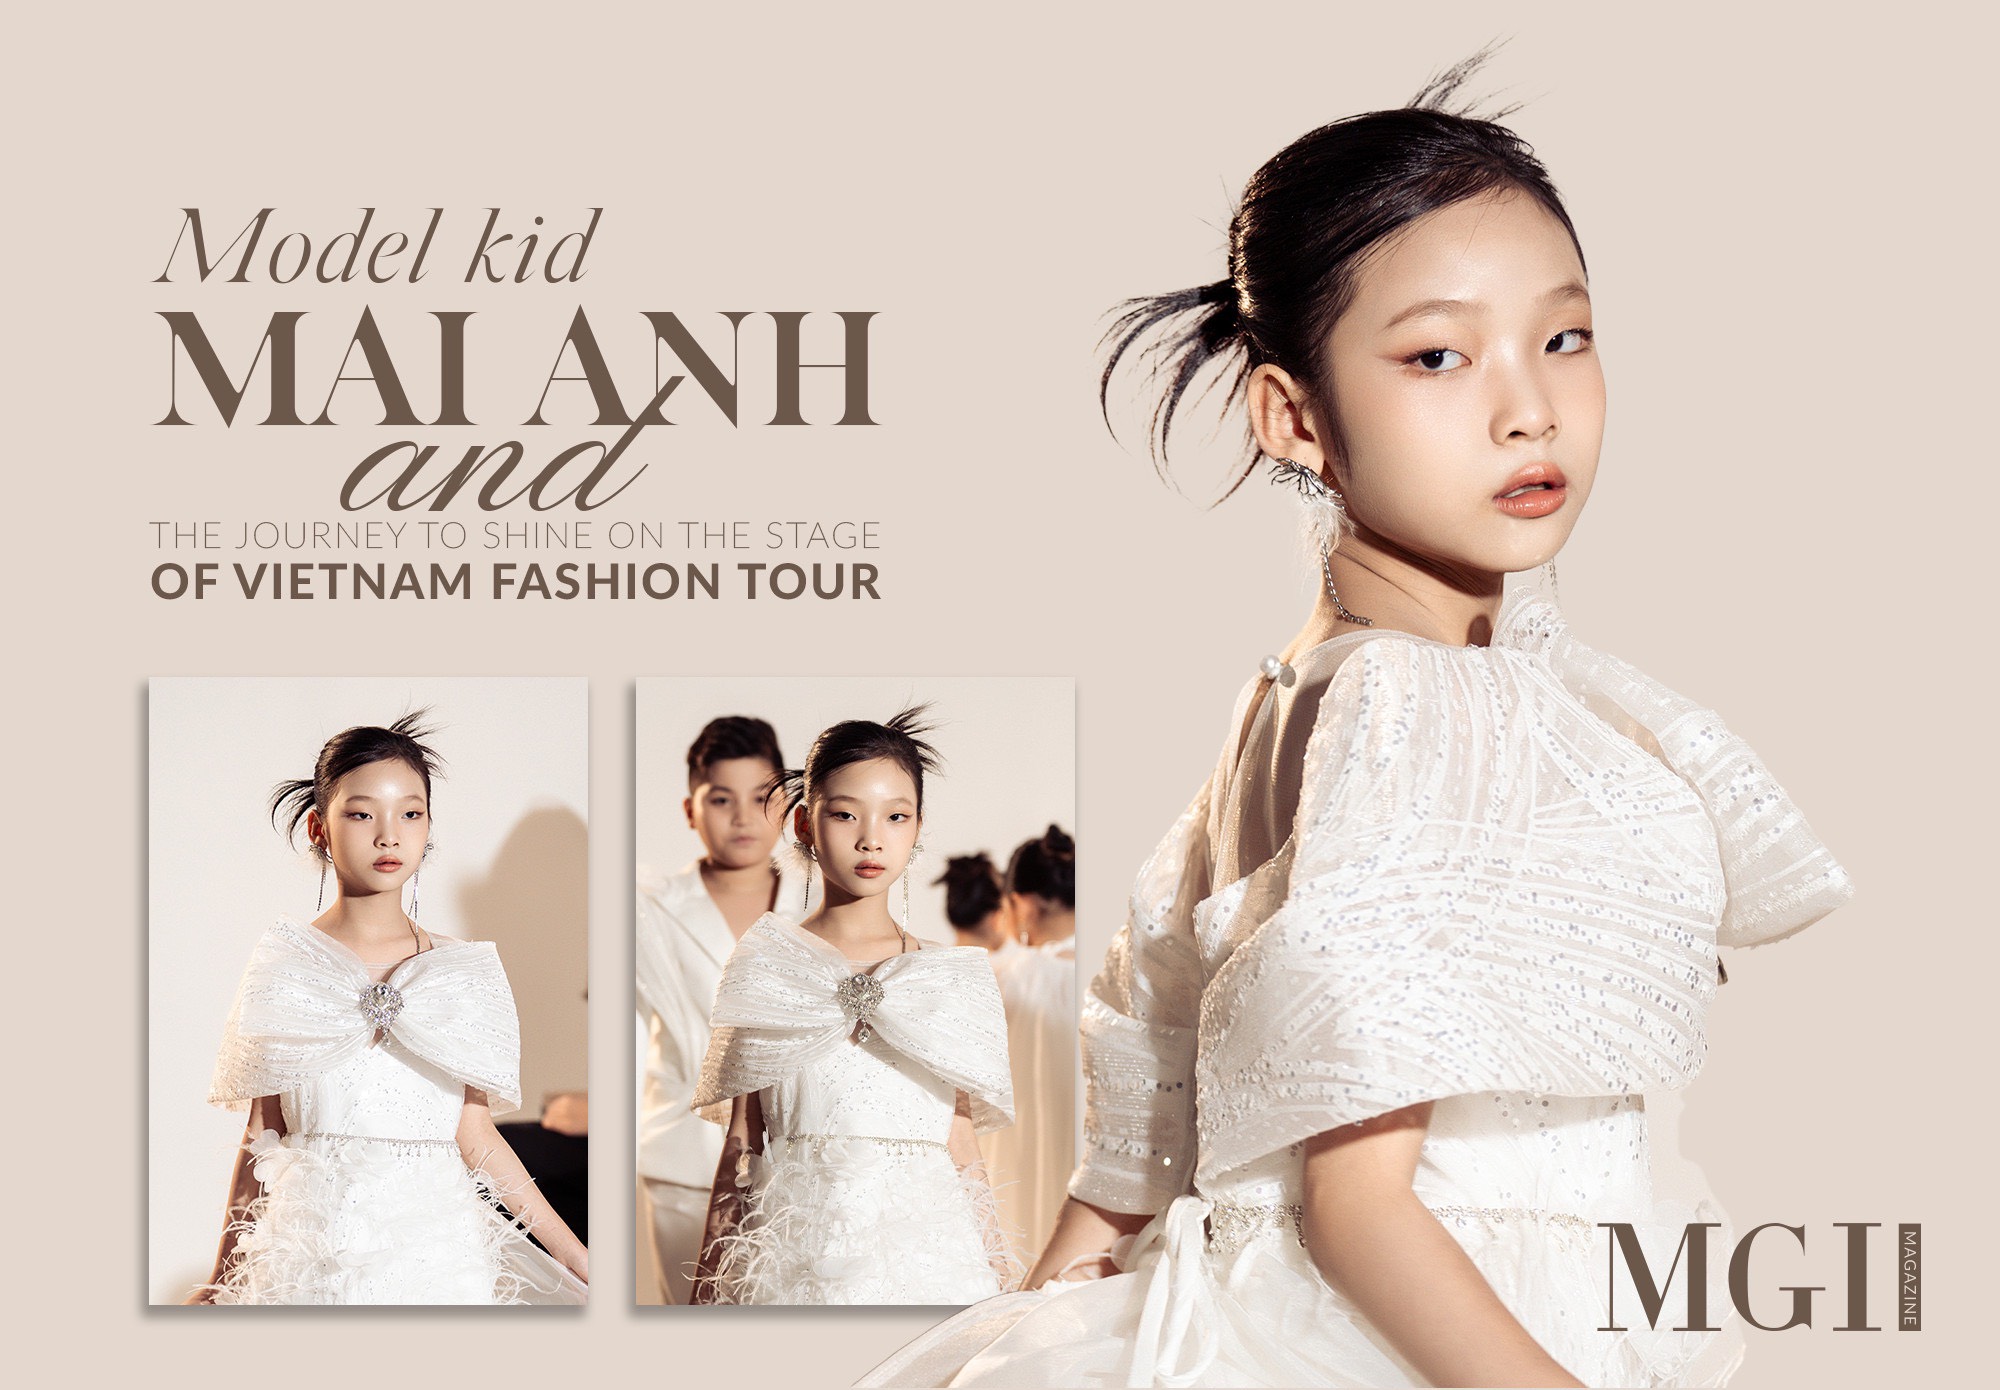 Model kid Mai Anh and the journey to shine on the stage of Vietnam Fashion Tour